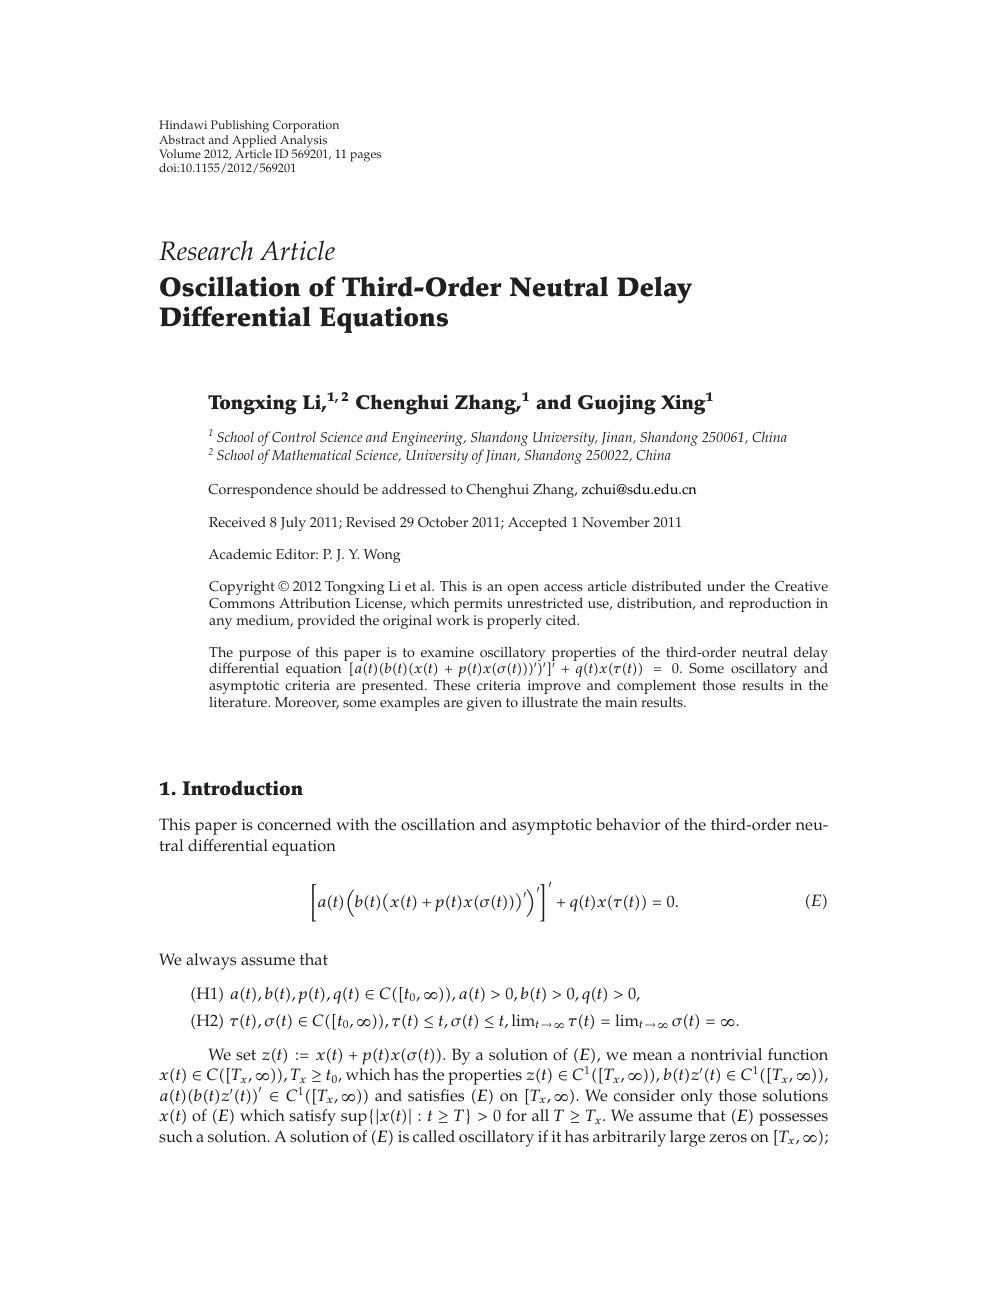 Oscillation Of Third Order Neutral Delay Differential Equations Topic Of Research Paper In Mathematics Download Scholarly Article Pdf And Read For Free On Cyberleninka Open Science Hub